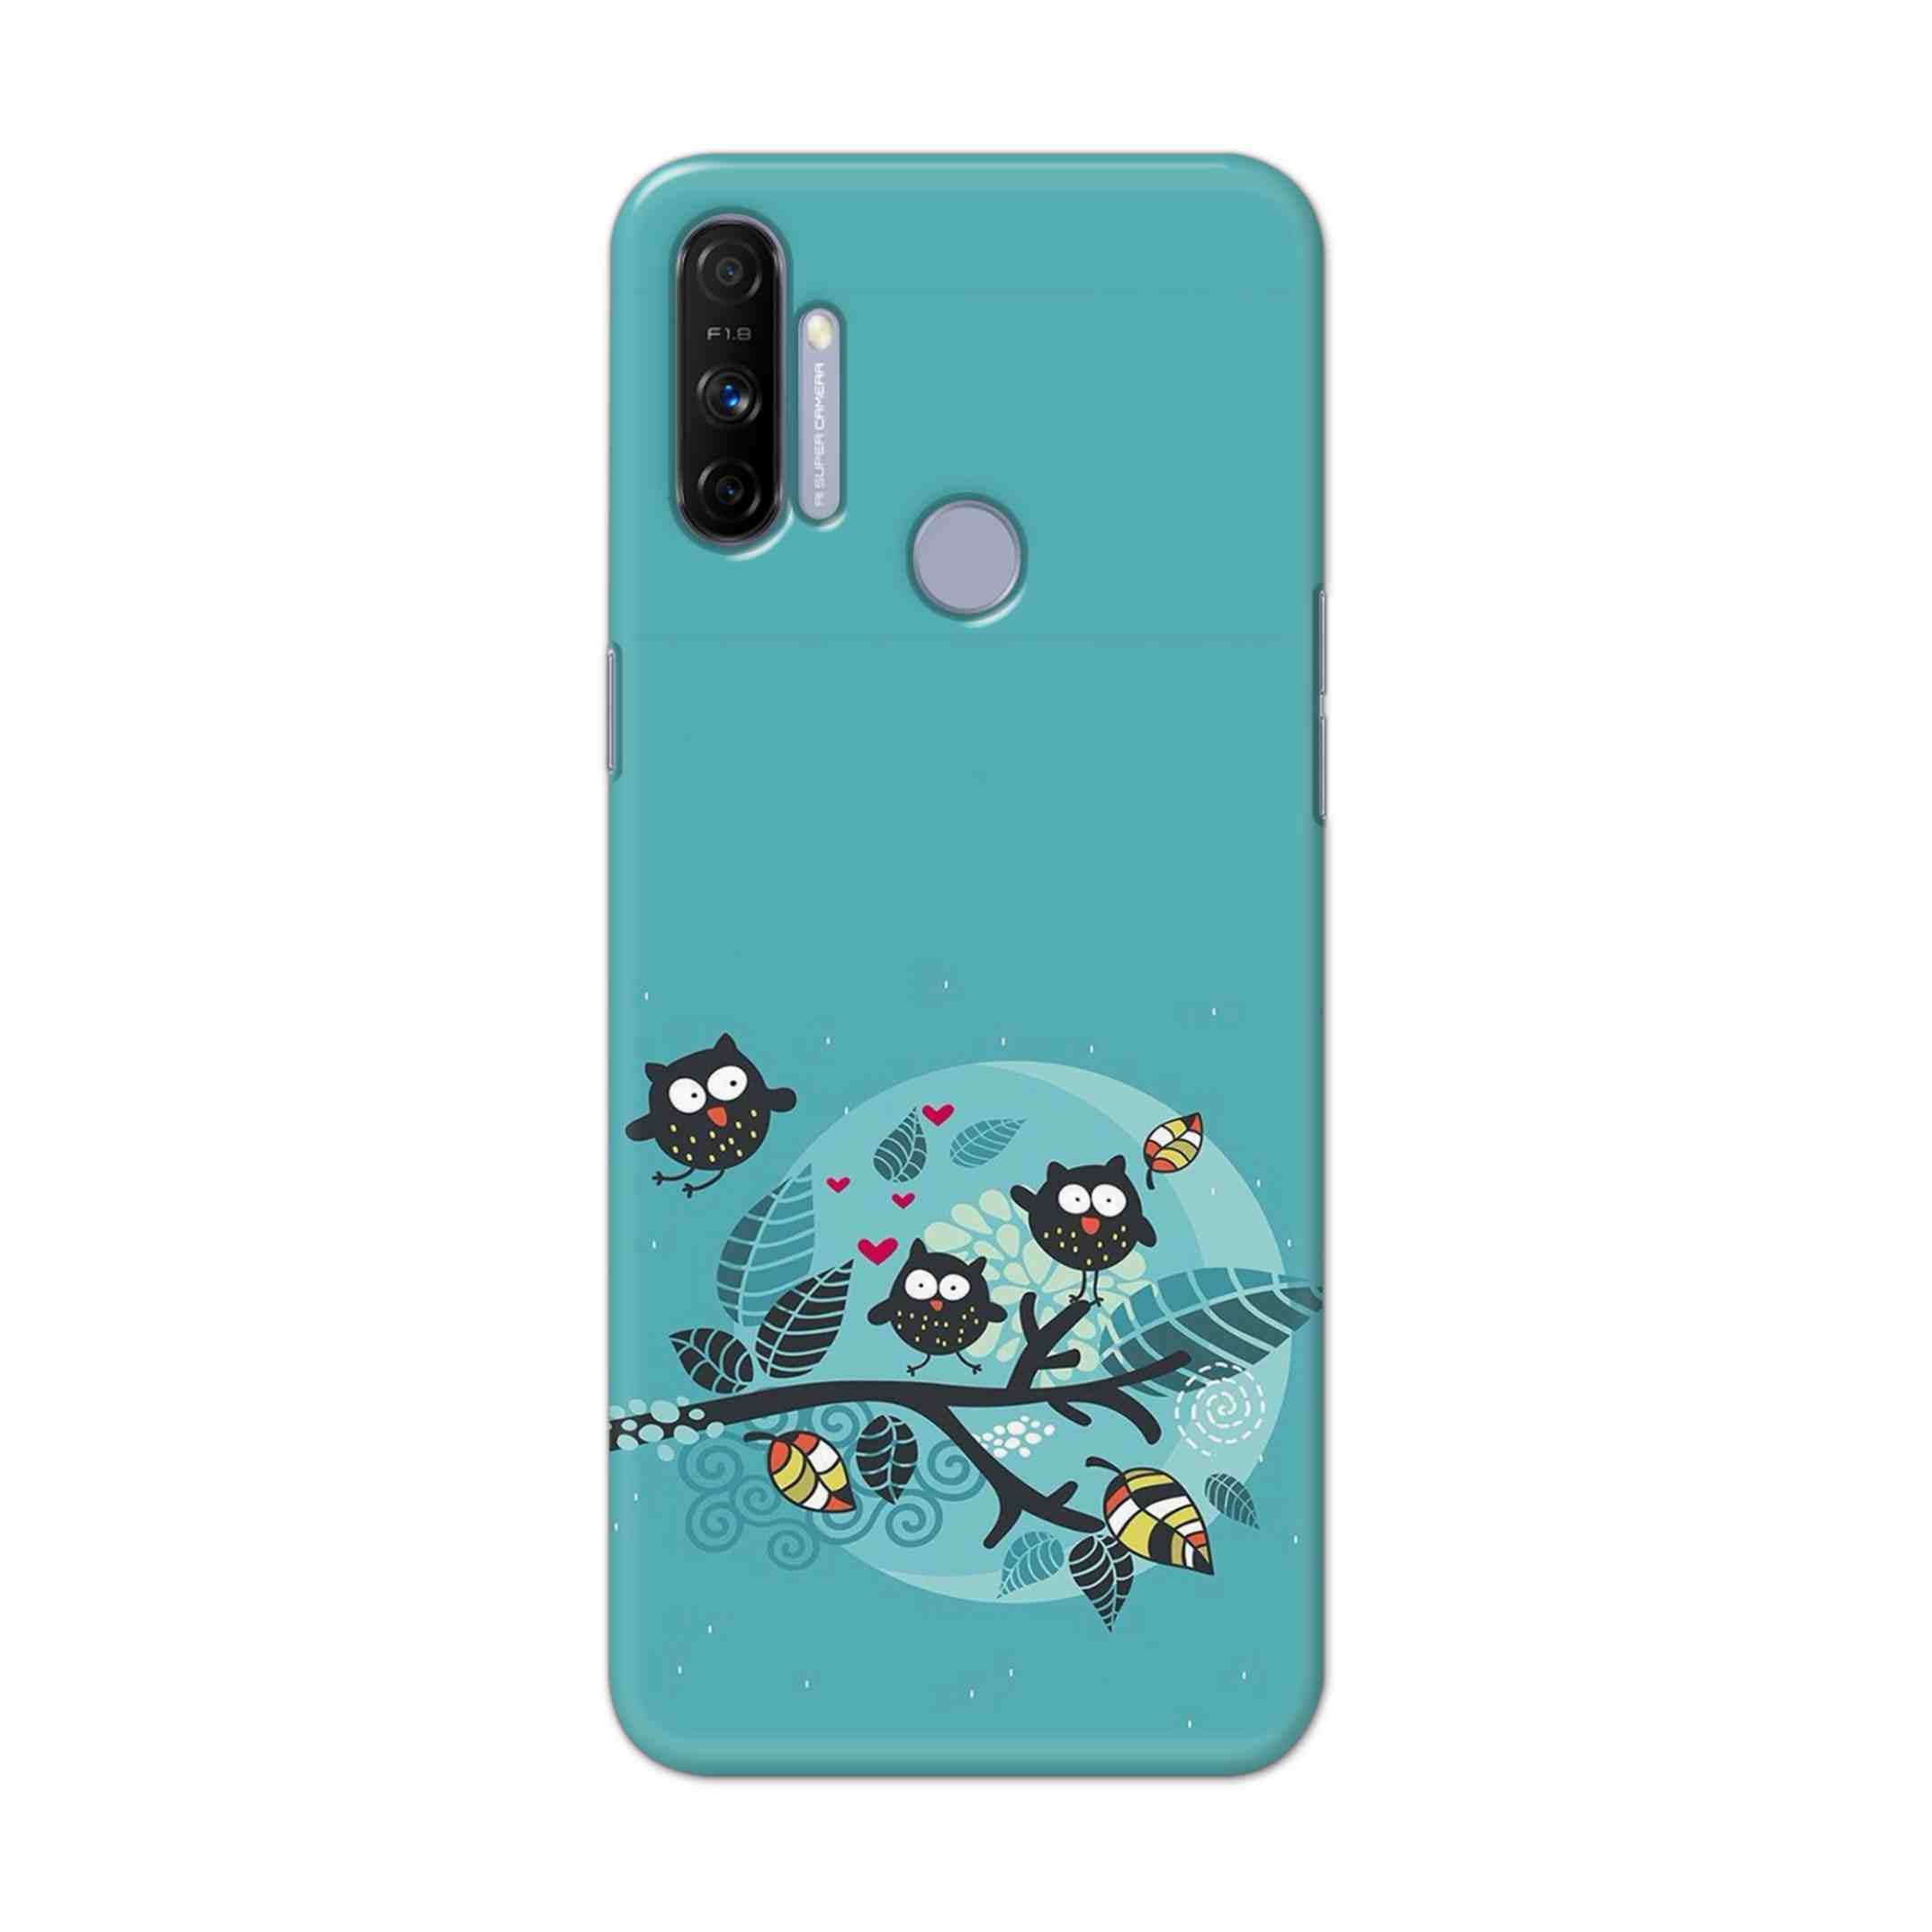 Buy Owl Hard Back Mobile Phone Case Cover For Realme Narzo 20A Online